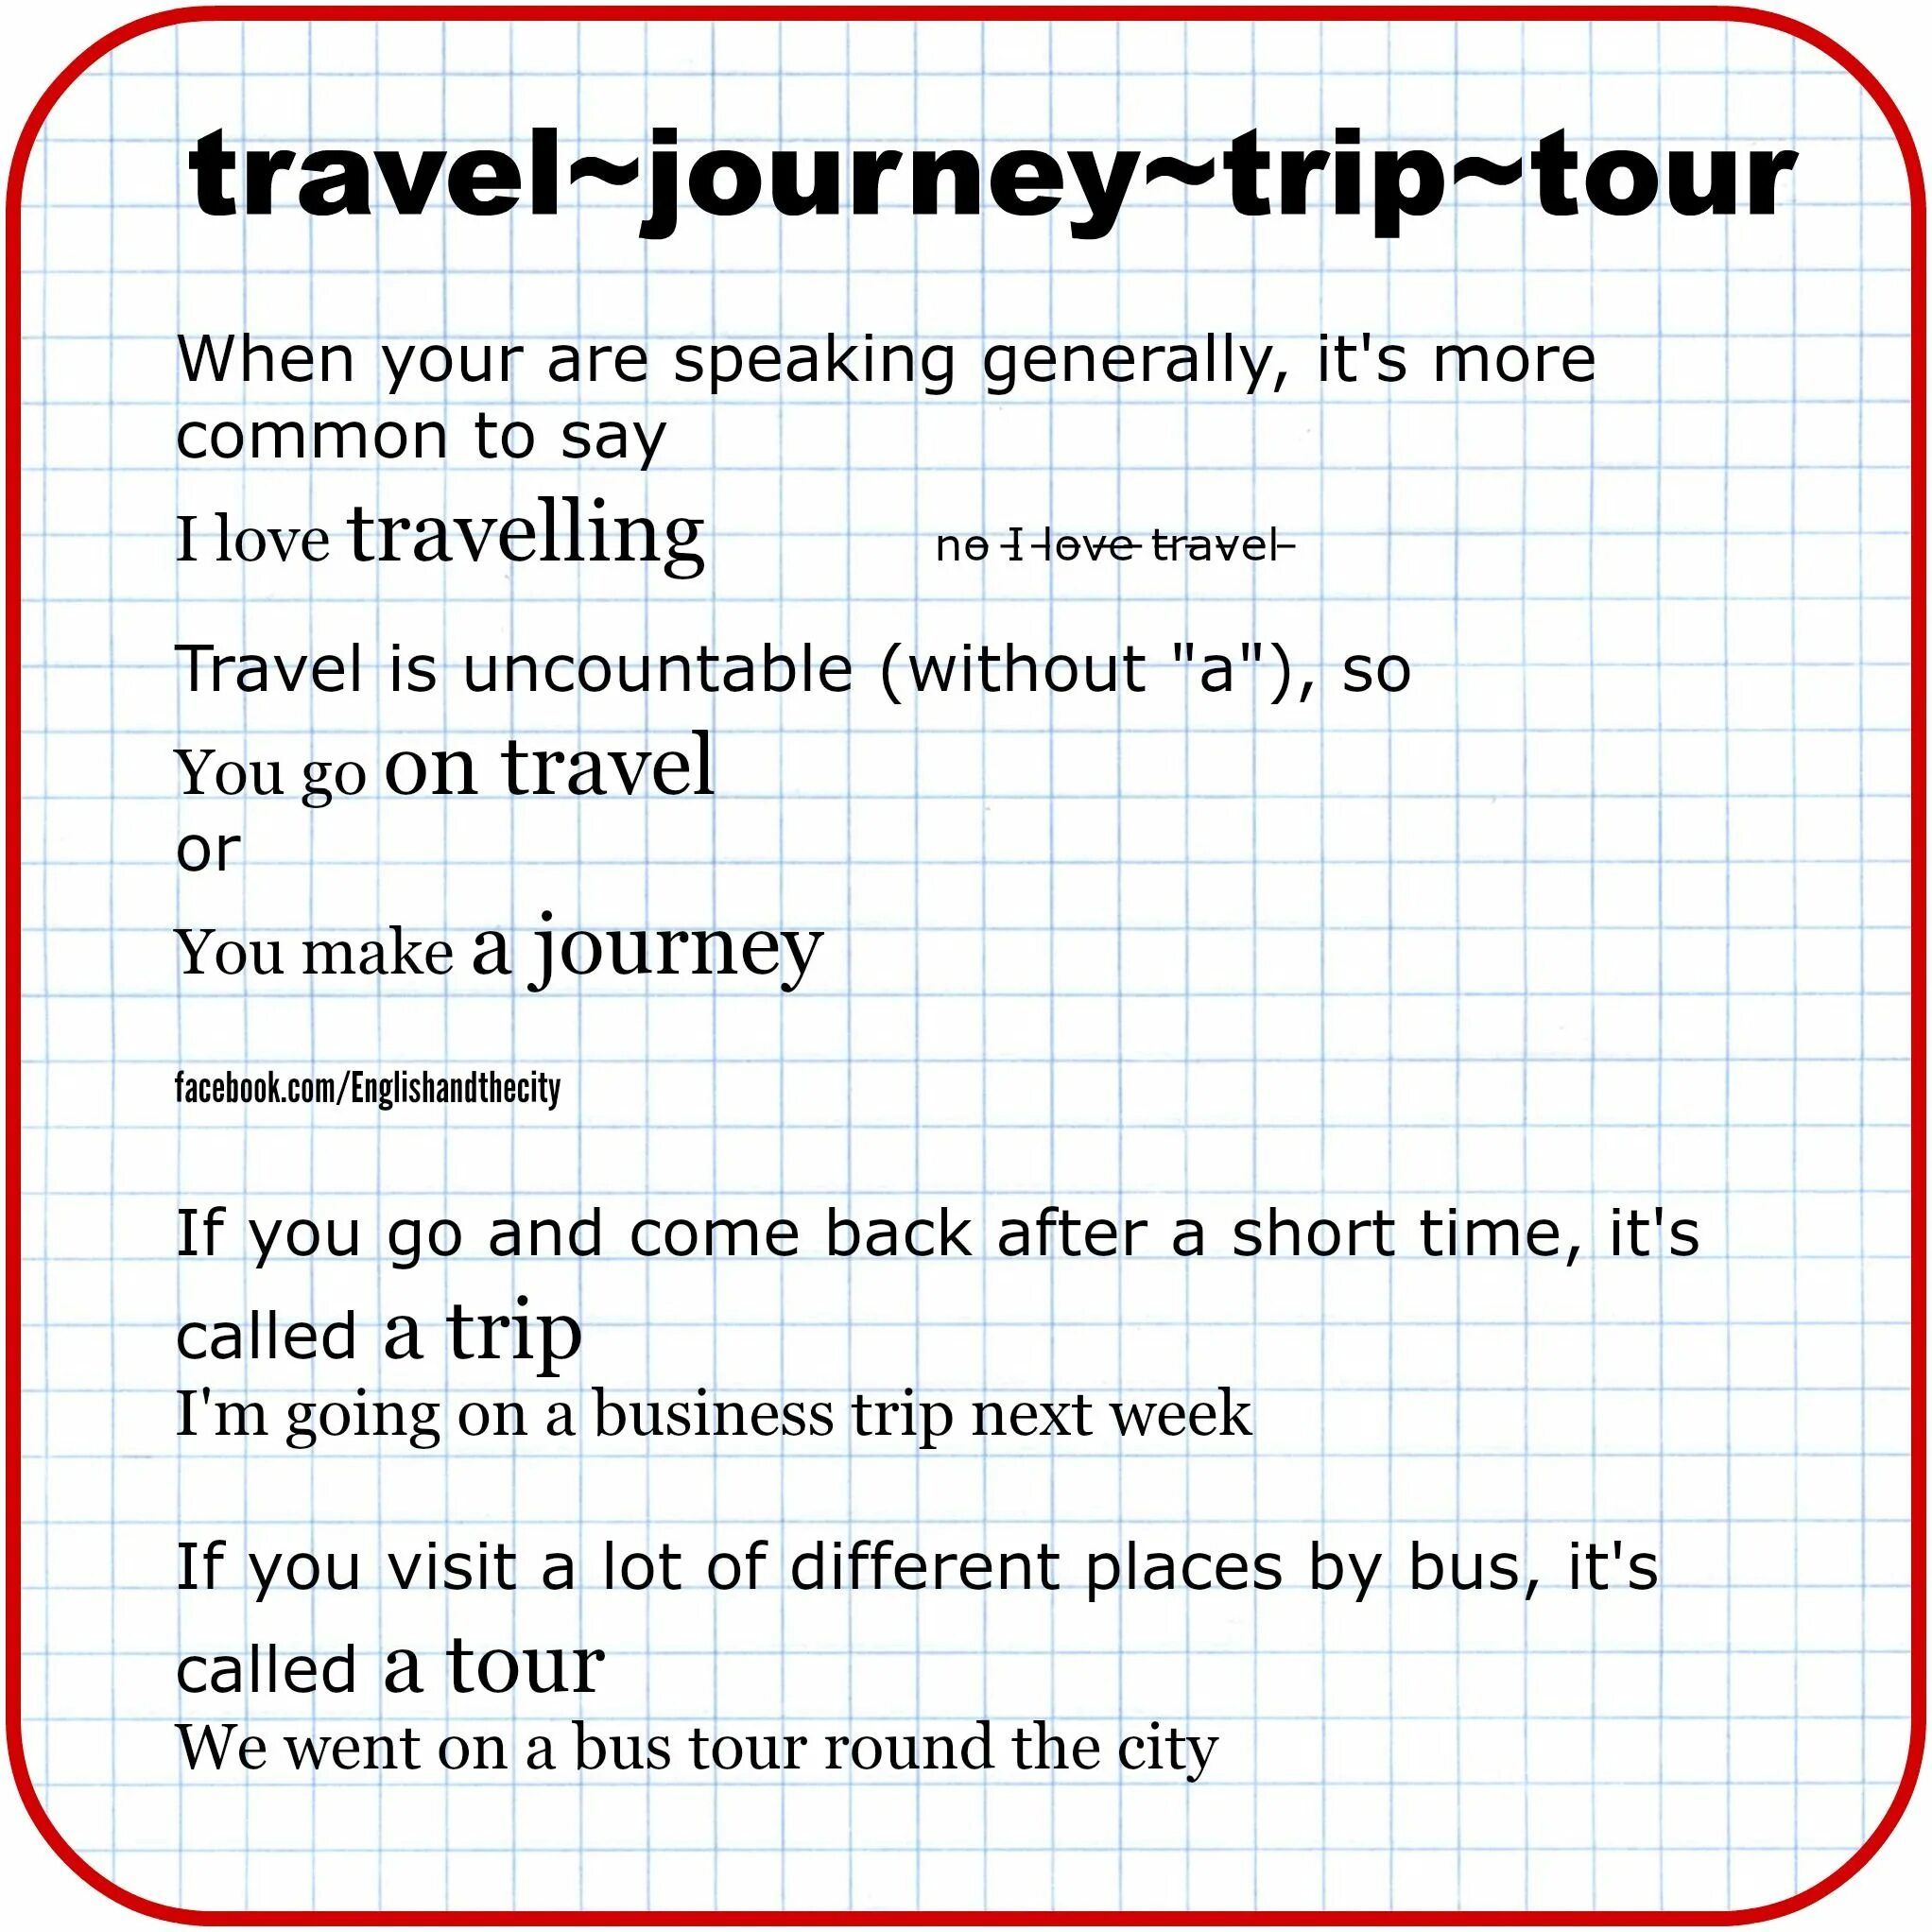 Journey trip Travel Tour разница. Travel Journey Voyage trip Tour. Journey Travel разница. Travel Journey Voyage trip Tour разница. Difference journey